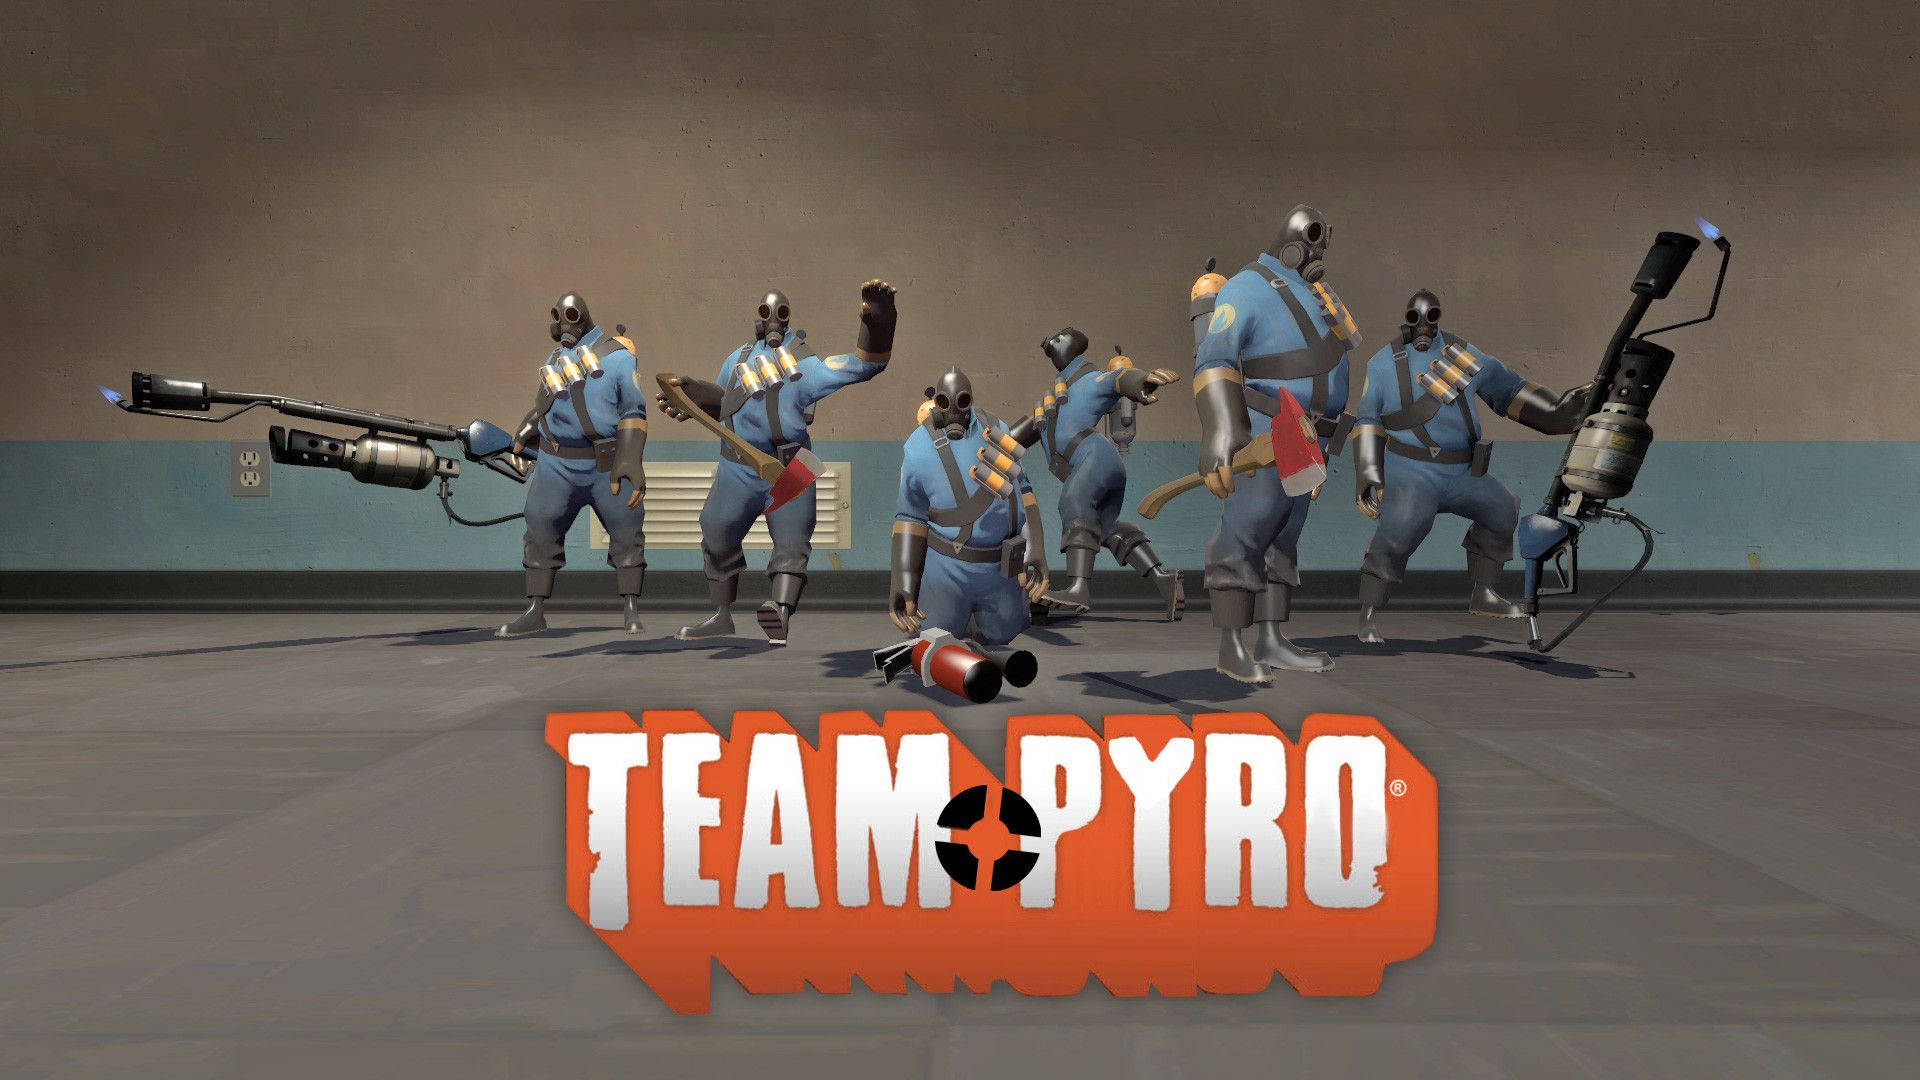 Pyro, The Blazing Character From Team Fortress 2. Background